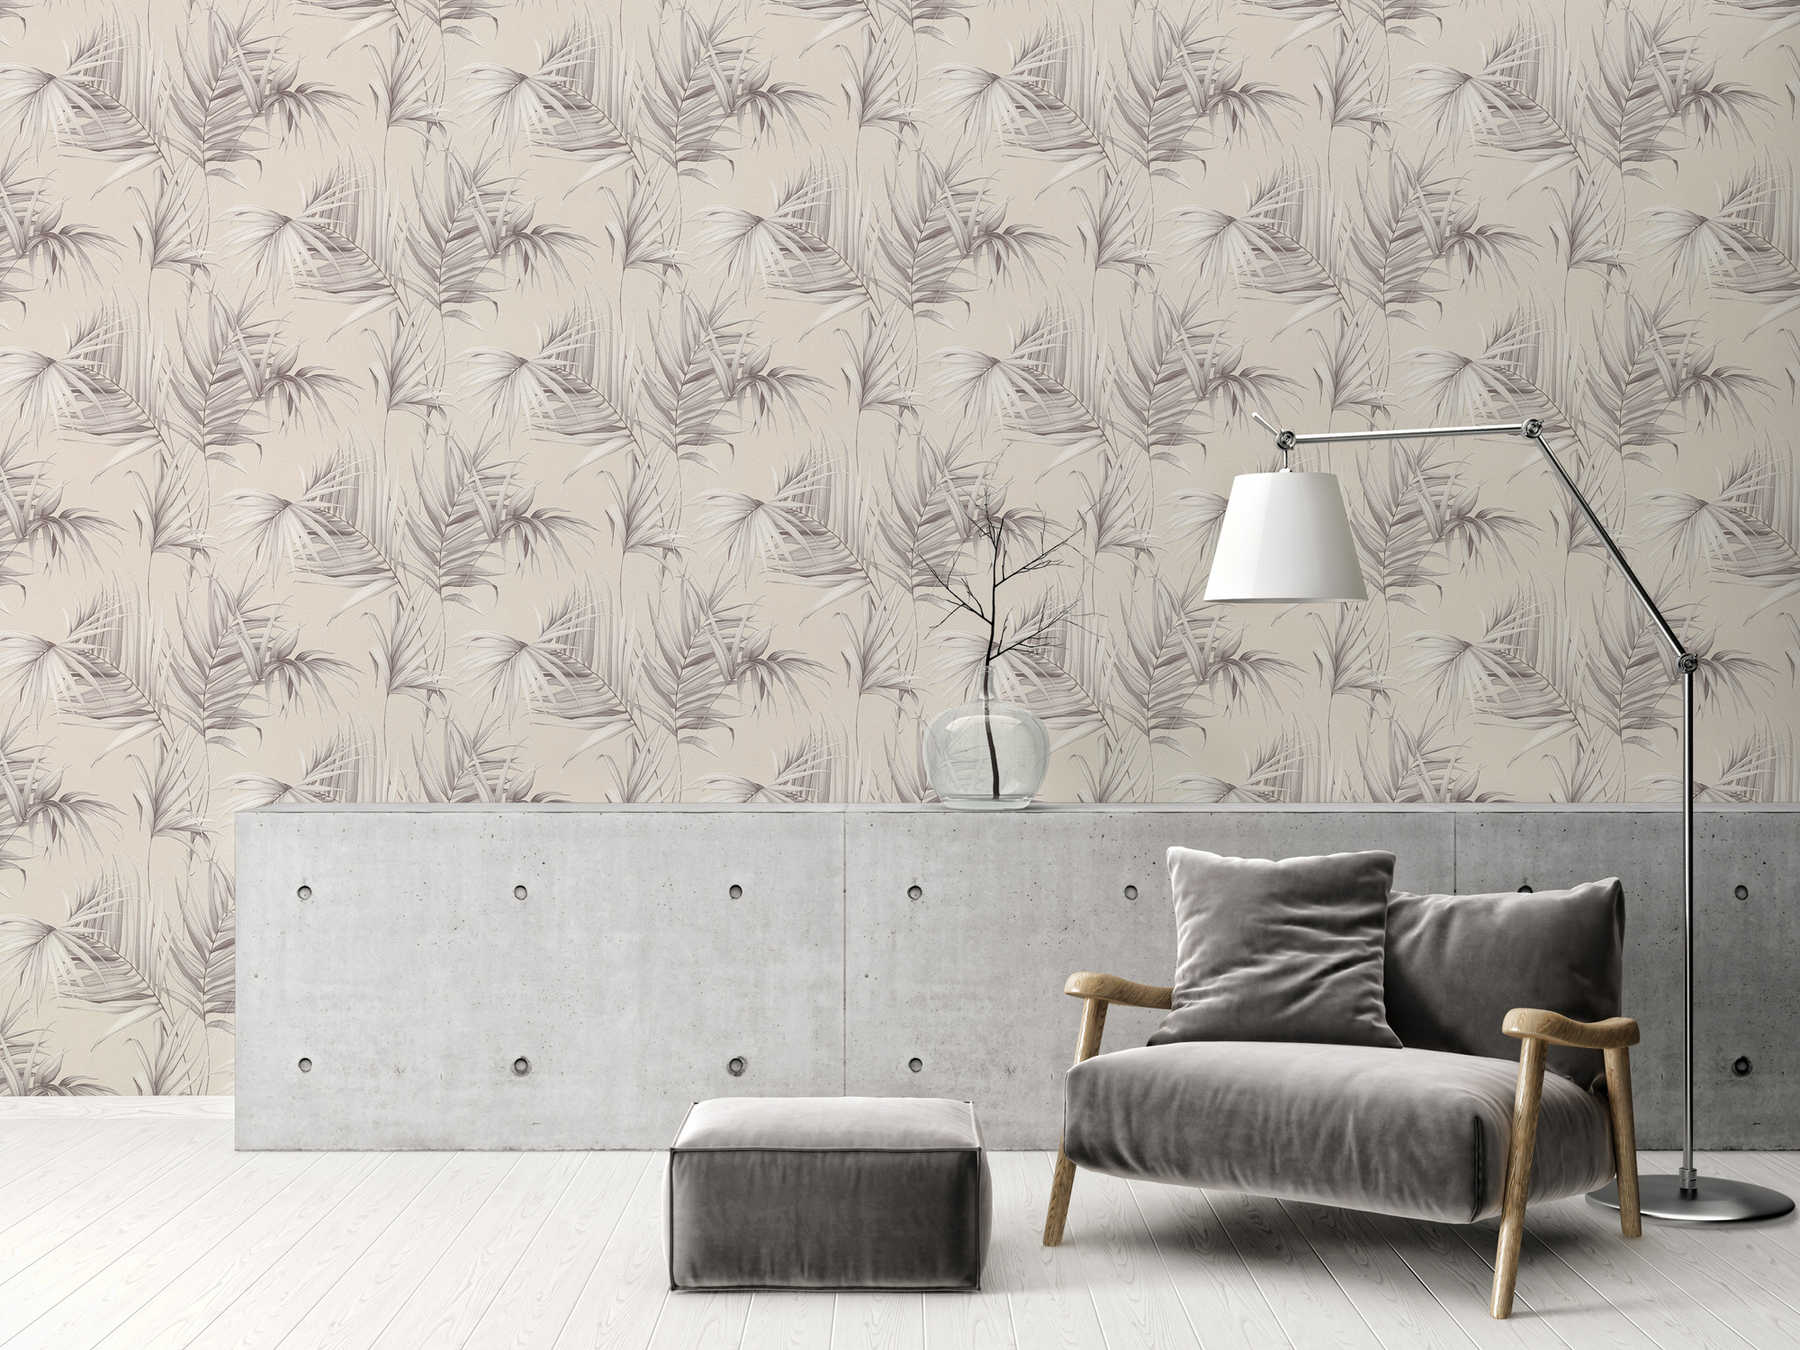             Palm leaves wallpaper with texture effect - beige, grey
        